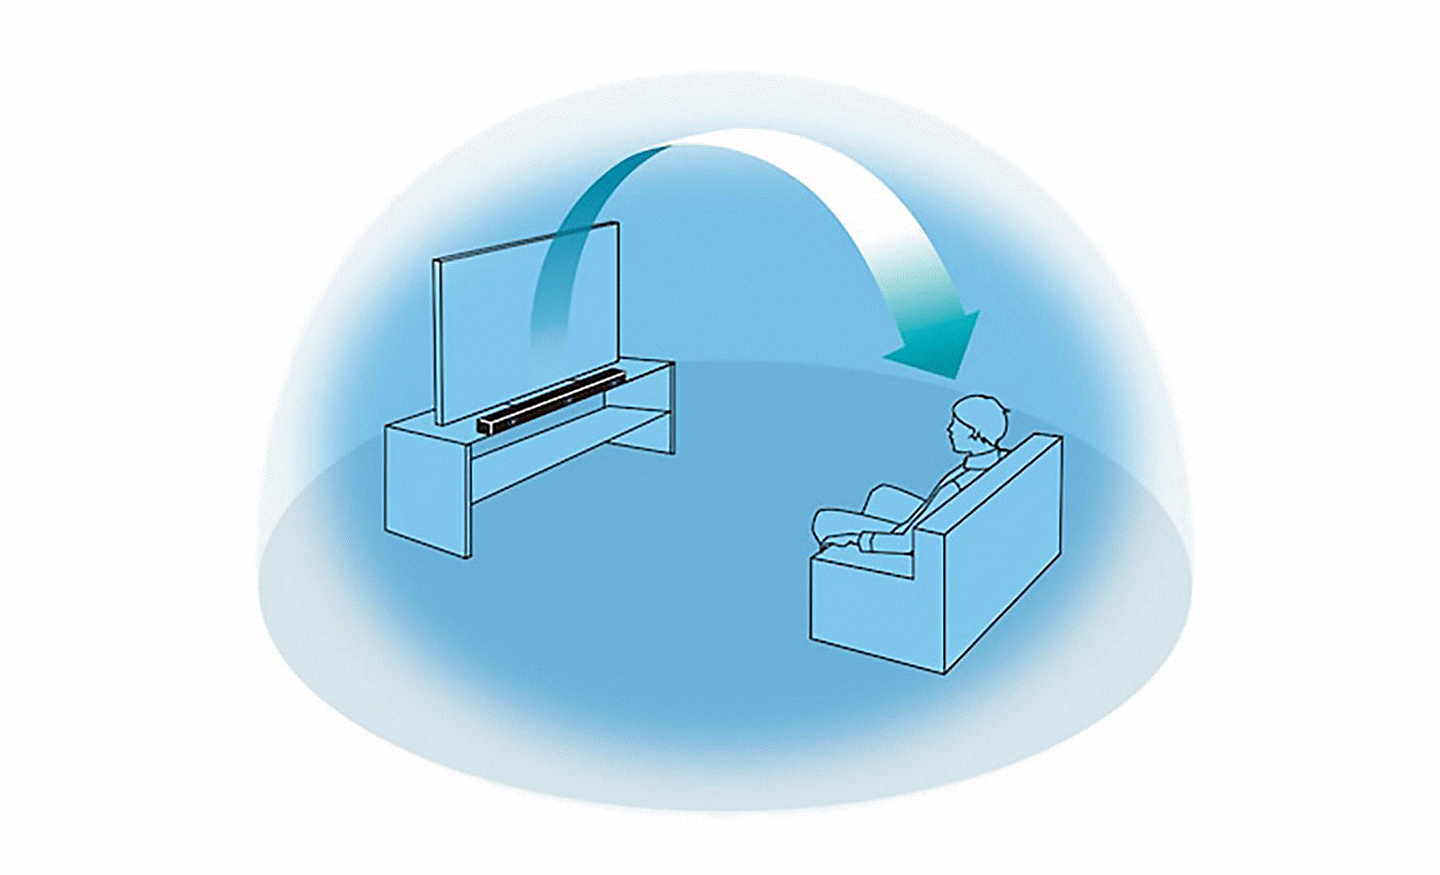 Image of a blue dome with a person siting in front of a TV and soundbar inside, an arrow runs from the sound bar to the person